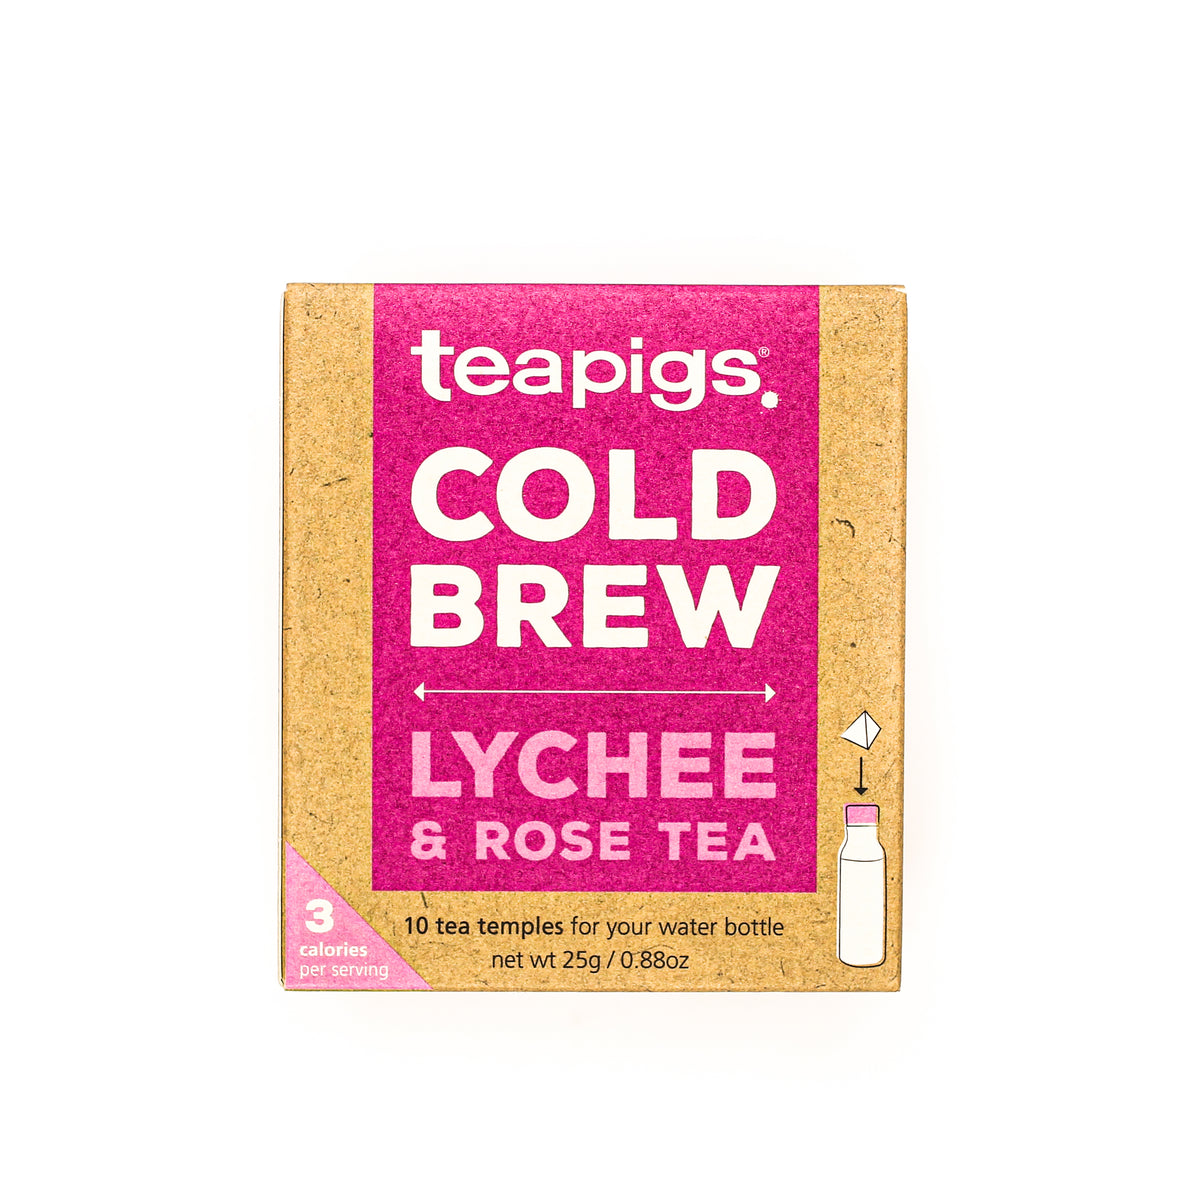 Teapigs Cold Brew Lychee Rose